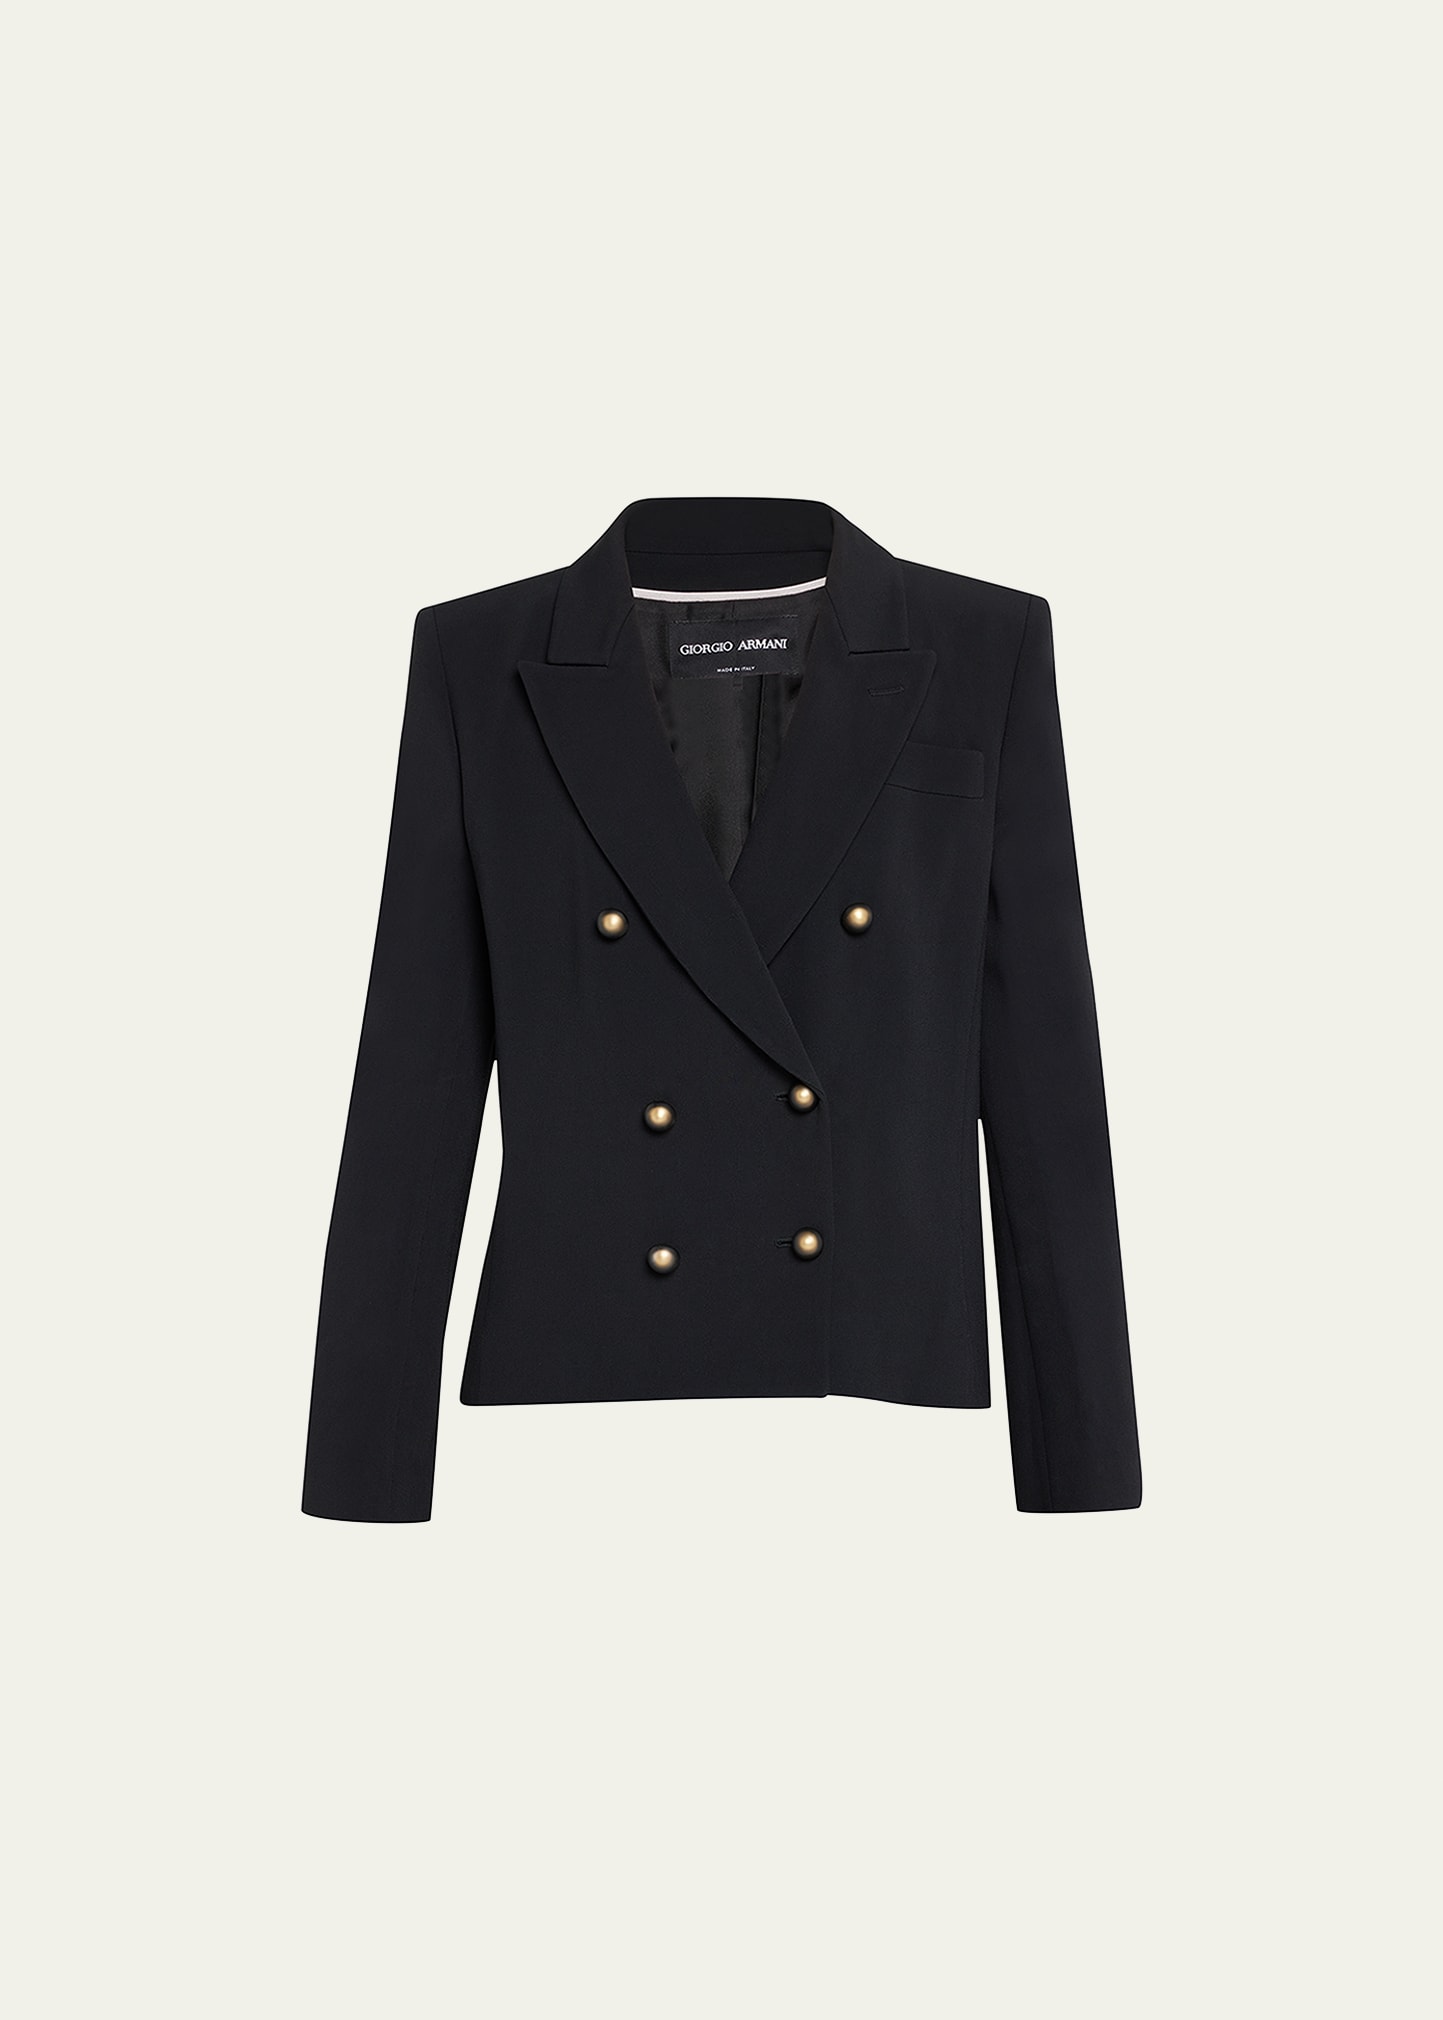 Giorgio Armani Cady Cropped Jacket W/ Button Detail In Solid Black